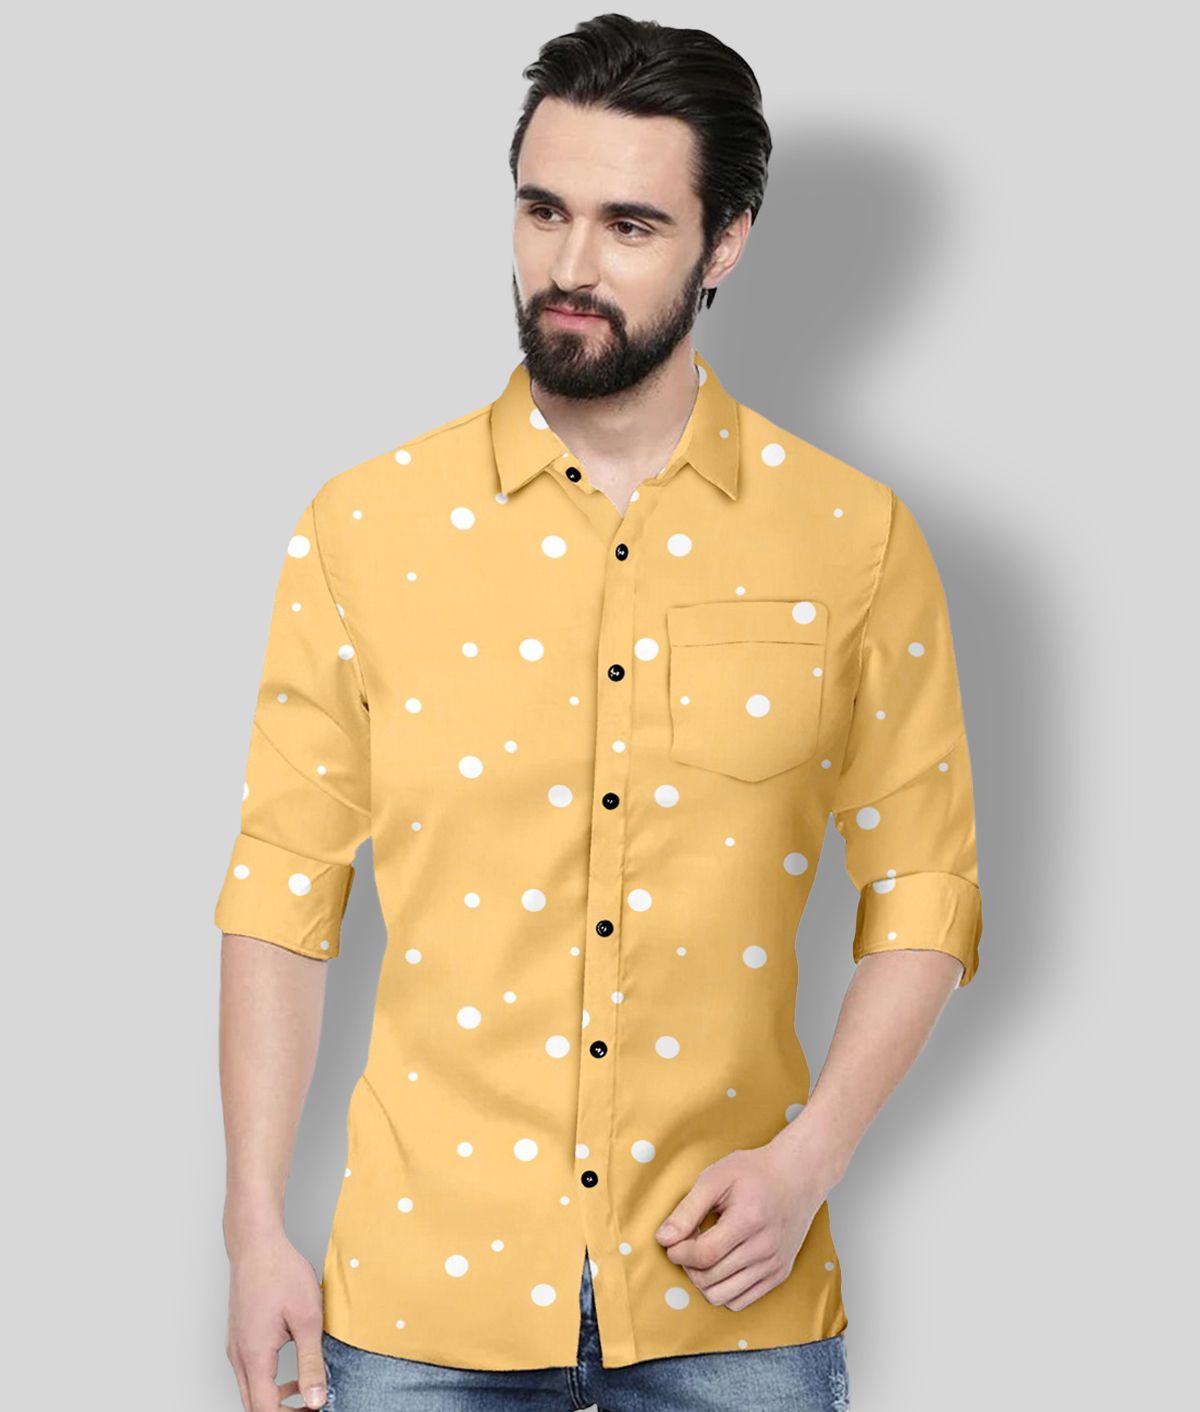     			P&V CREATIONS - Yellow Cotton Blend Slim Fit Men's Casual Shirt (Pack of 1)